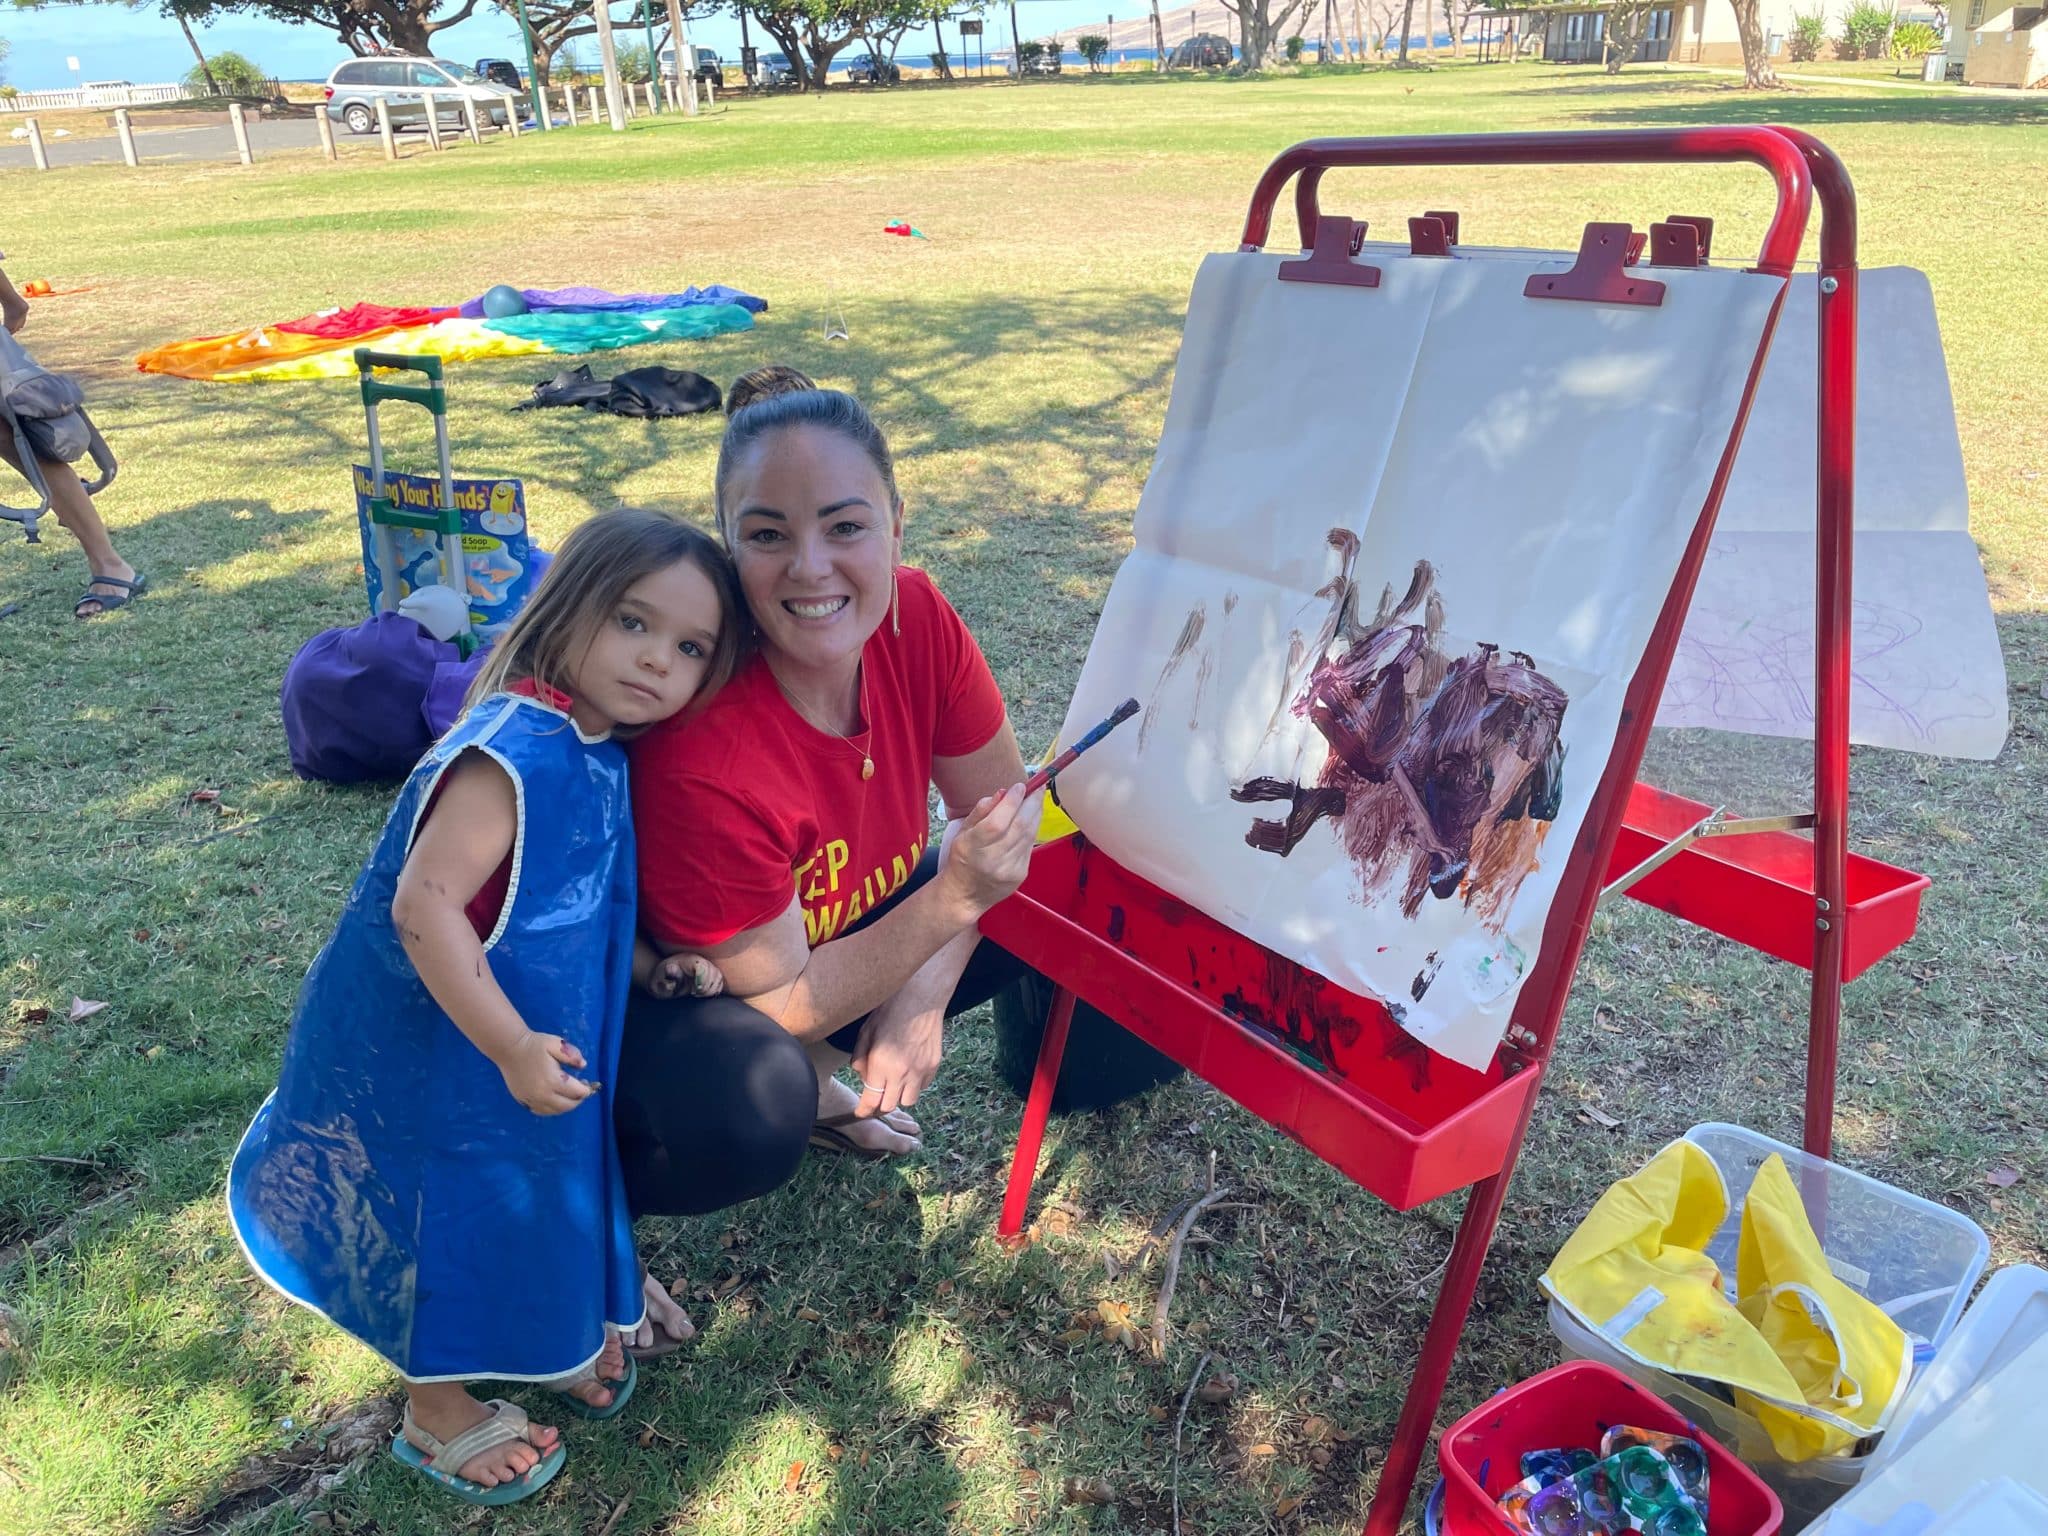 Little girl and her mother pose next to an easel containing the little girl's artwork.